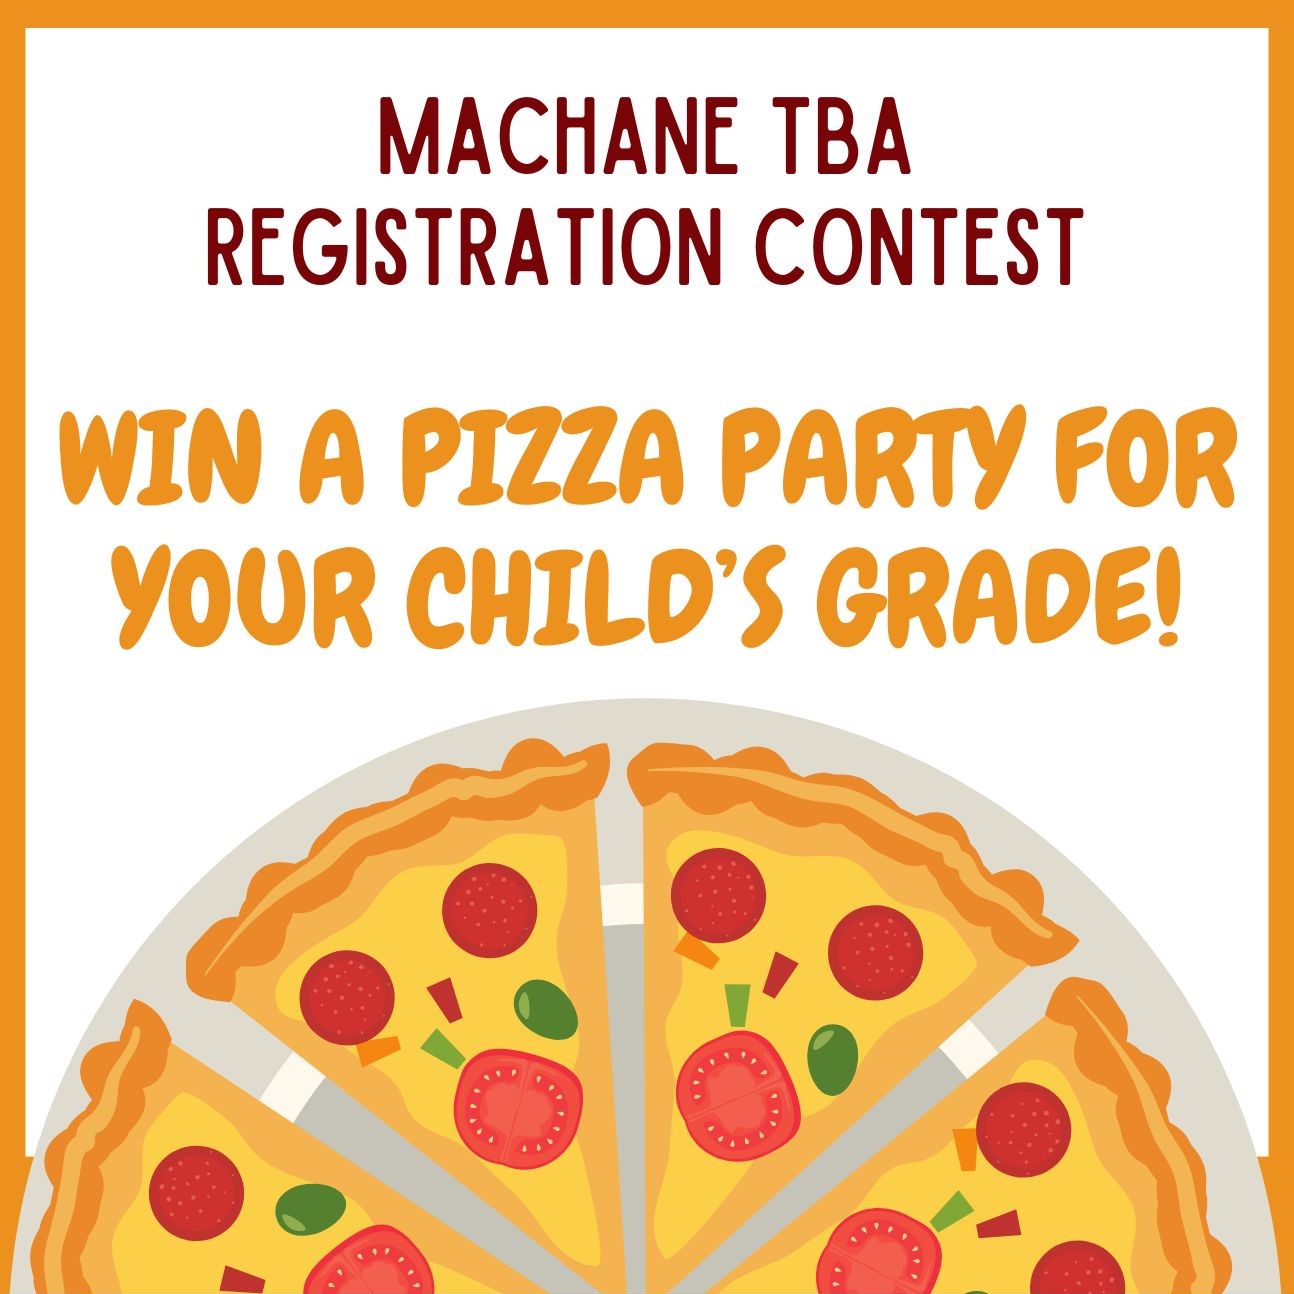 Separate contests for PreK-6th Gr. and 7-12th Gr.